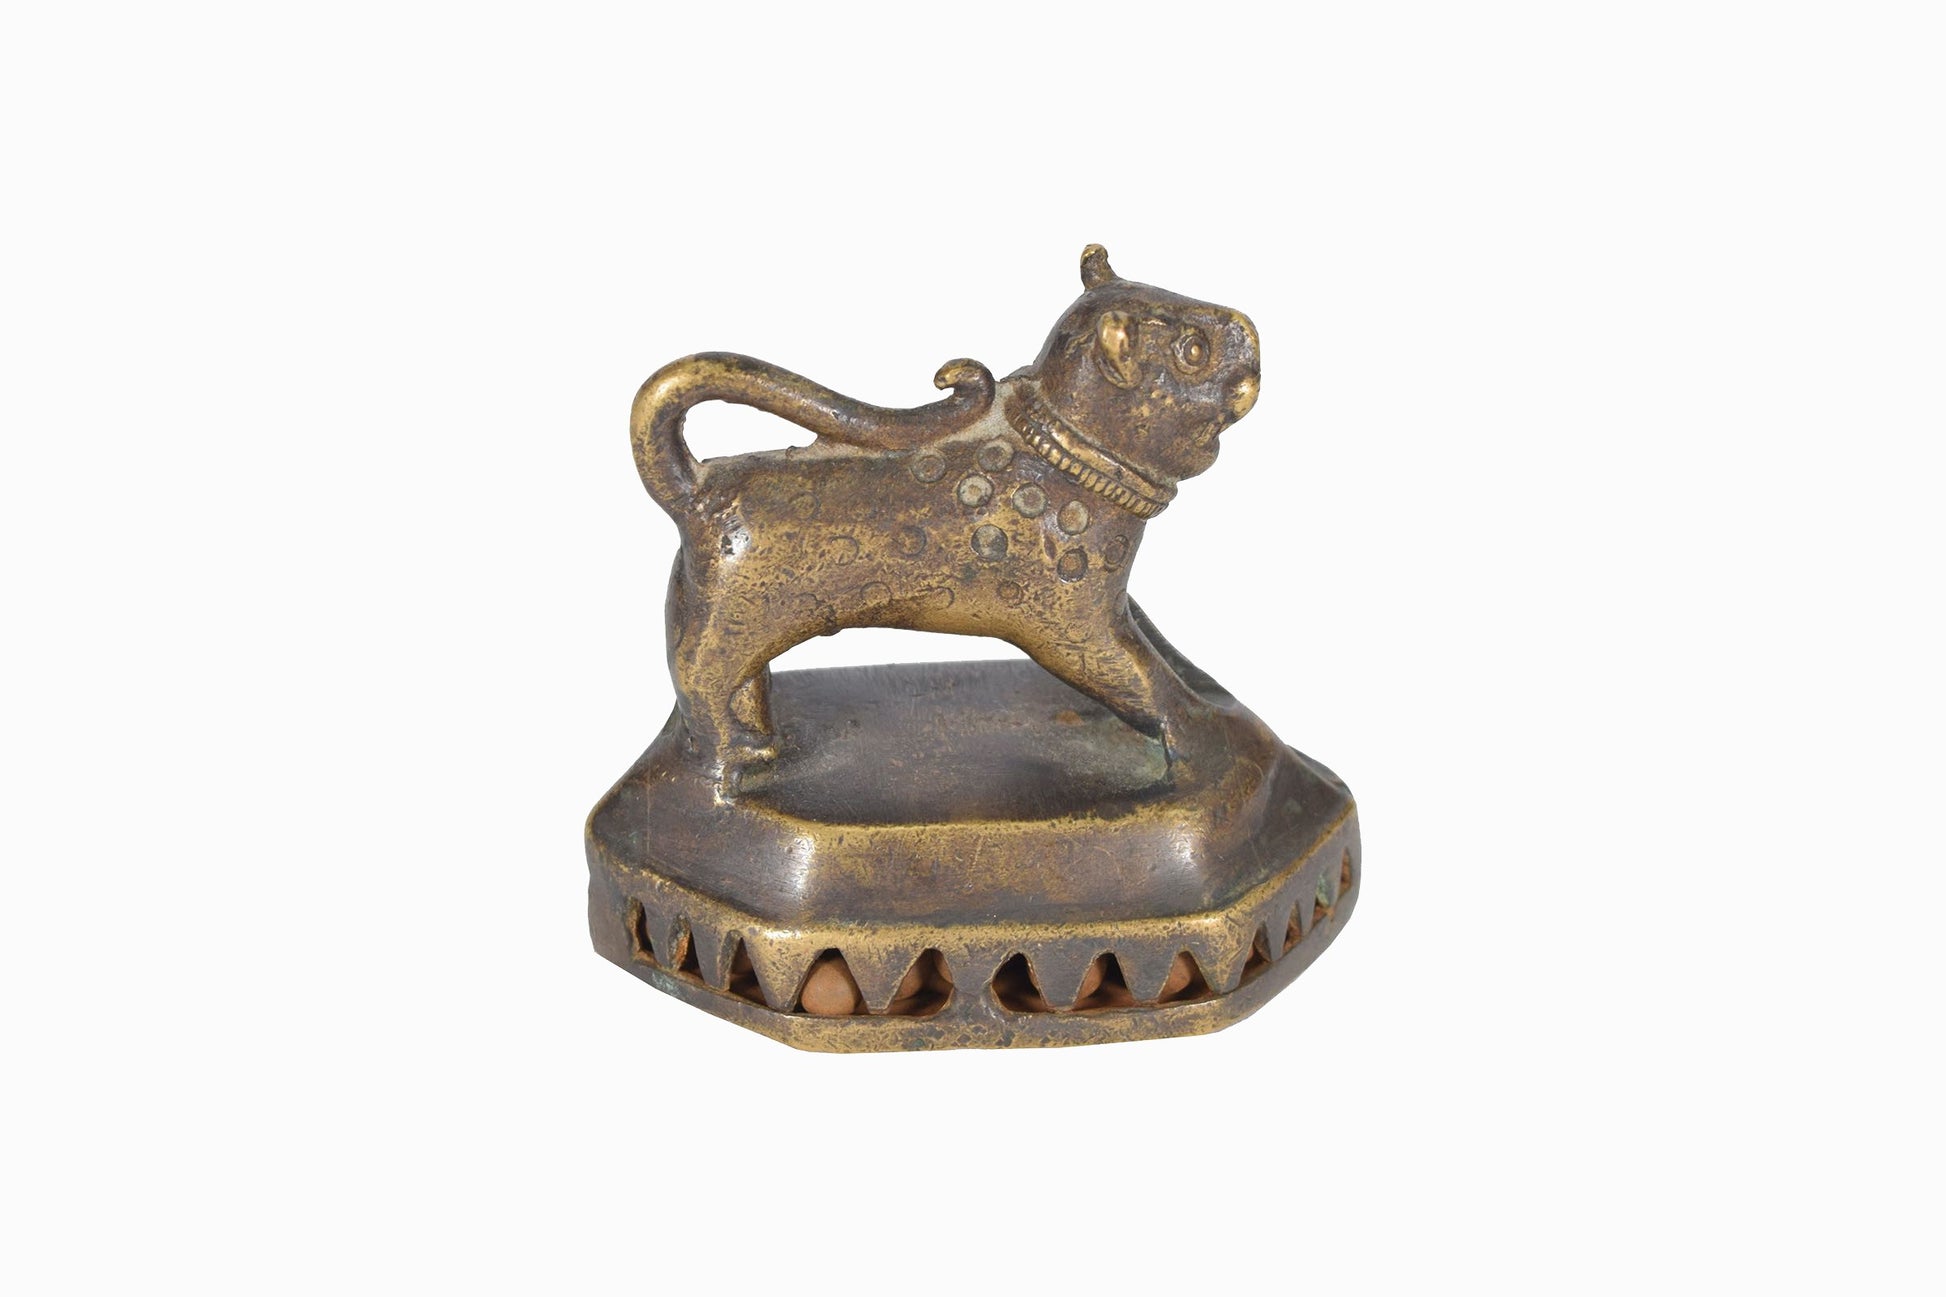 Vintage brass Indian foot scrubber with a leopard handle – Raj